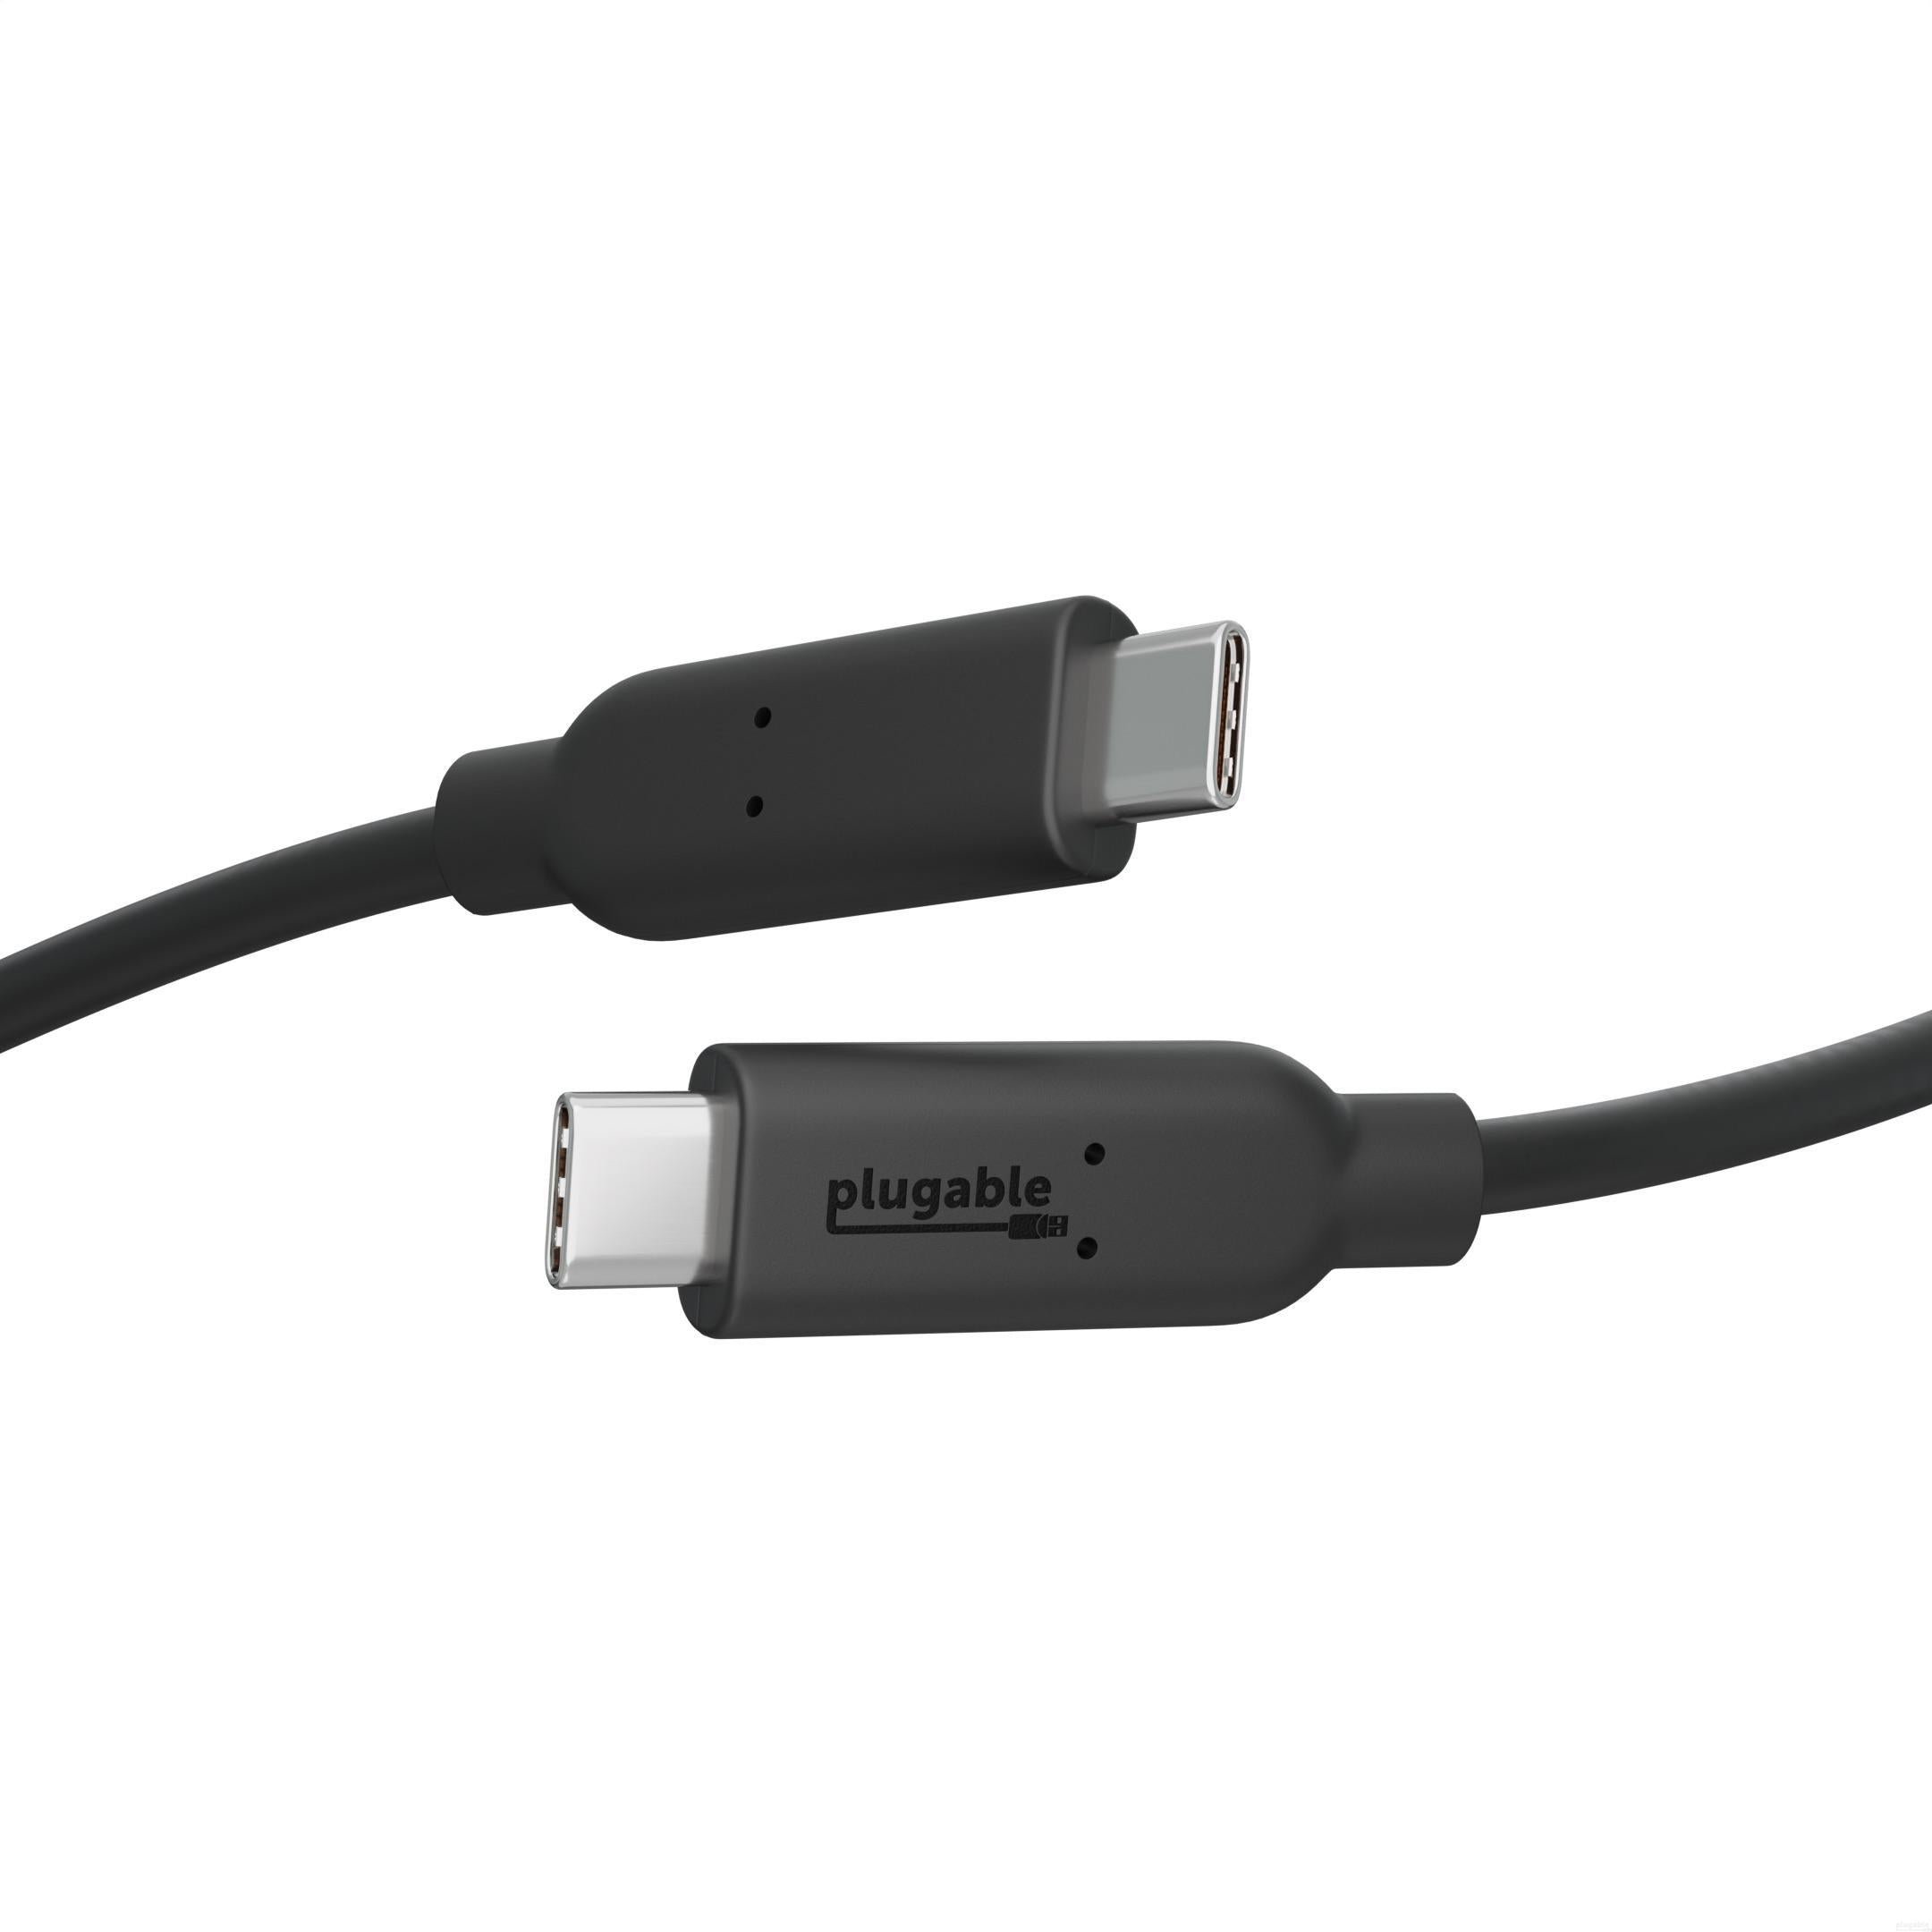 3.2 USB-C to USB-A Cable, USB-IF Certified, 3-ft